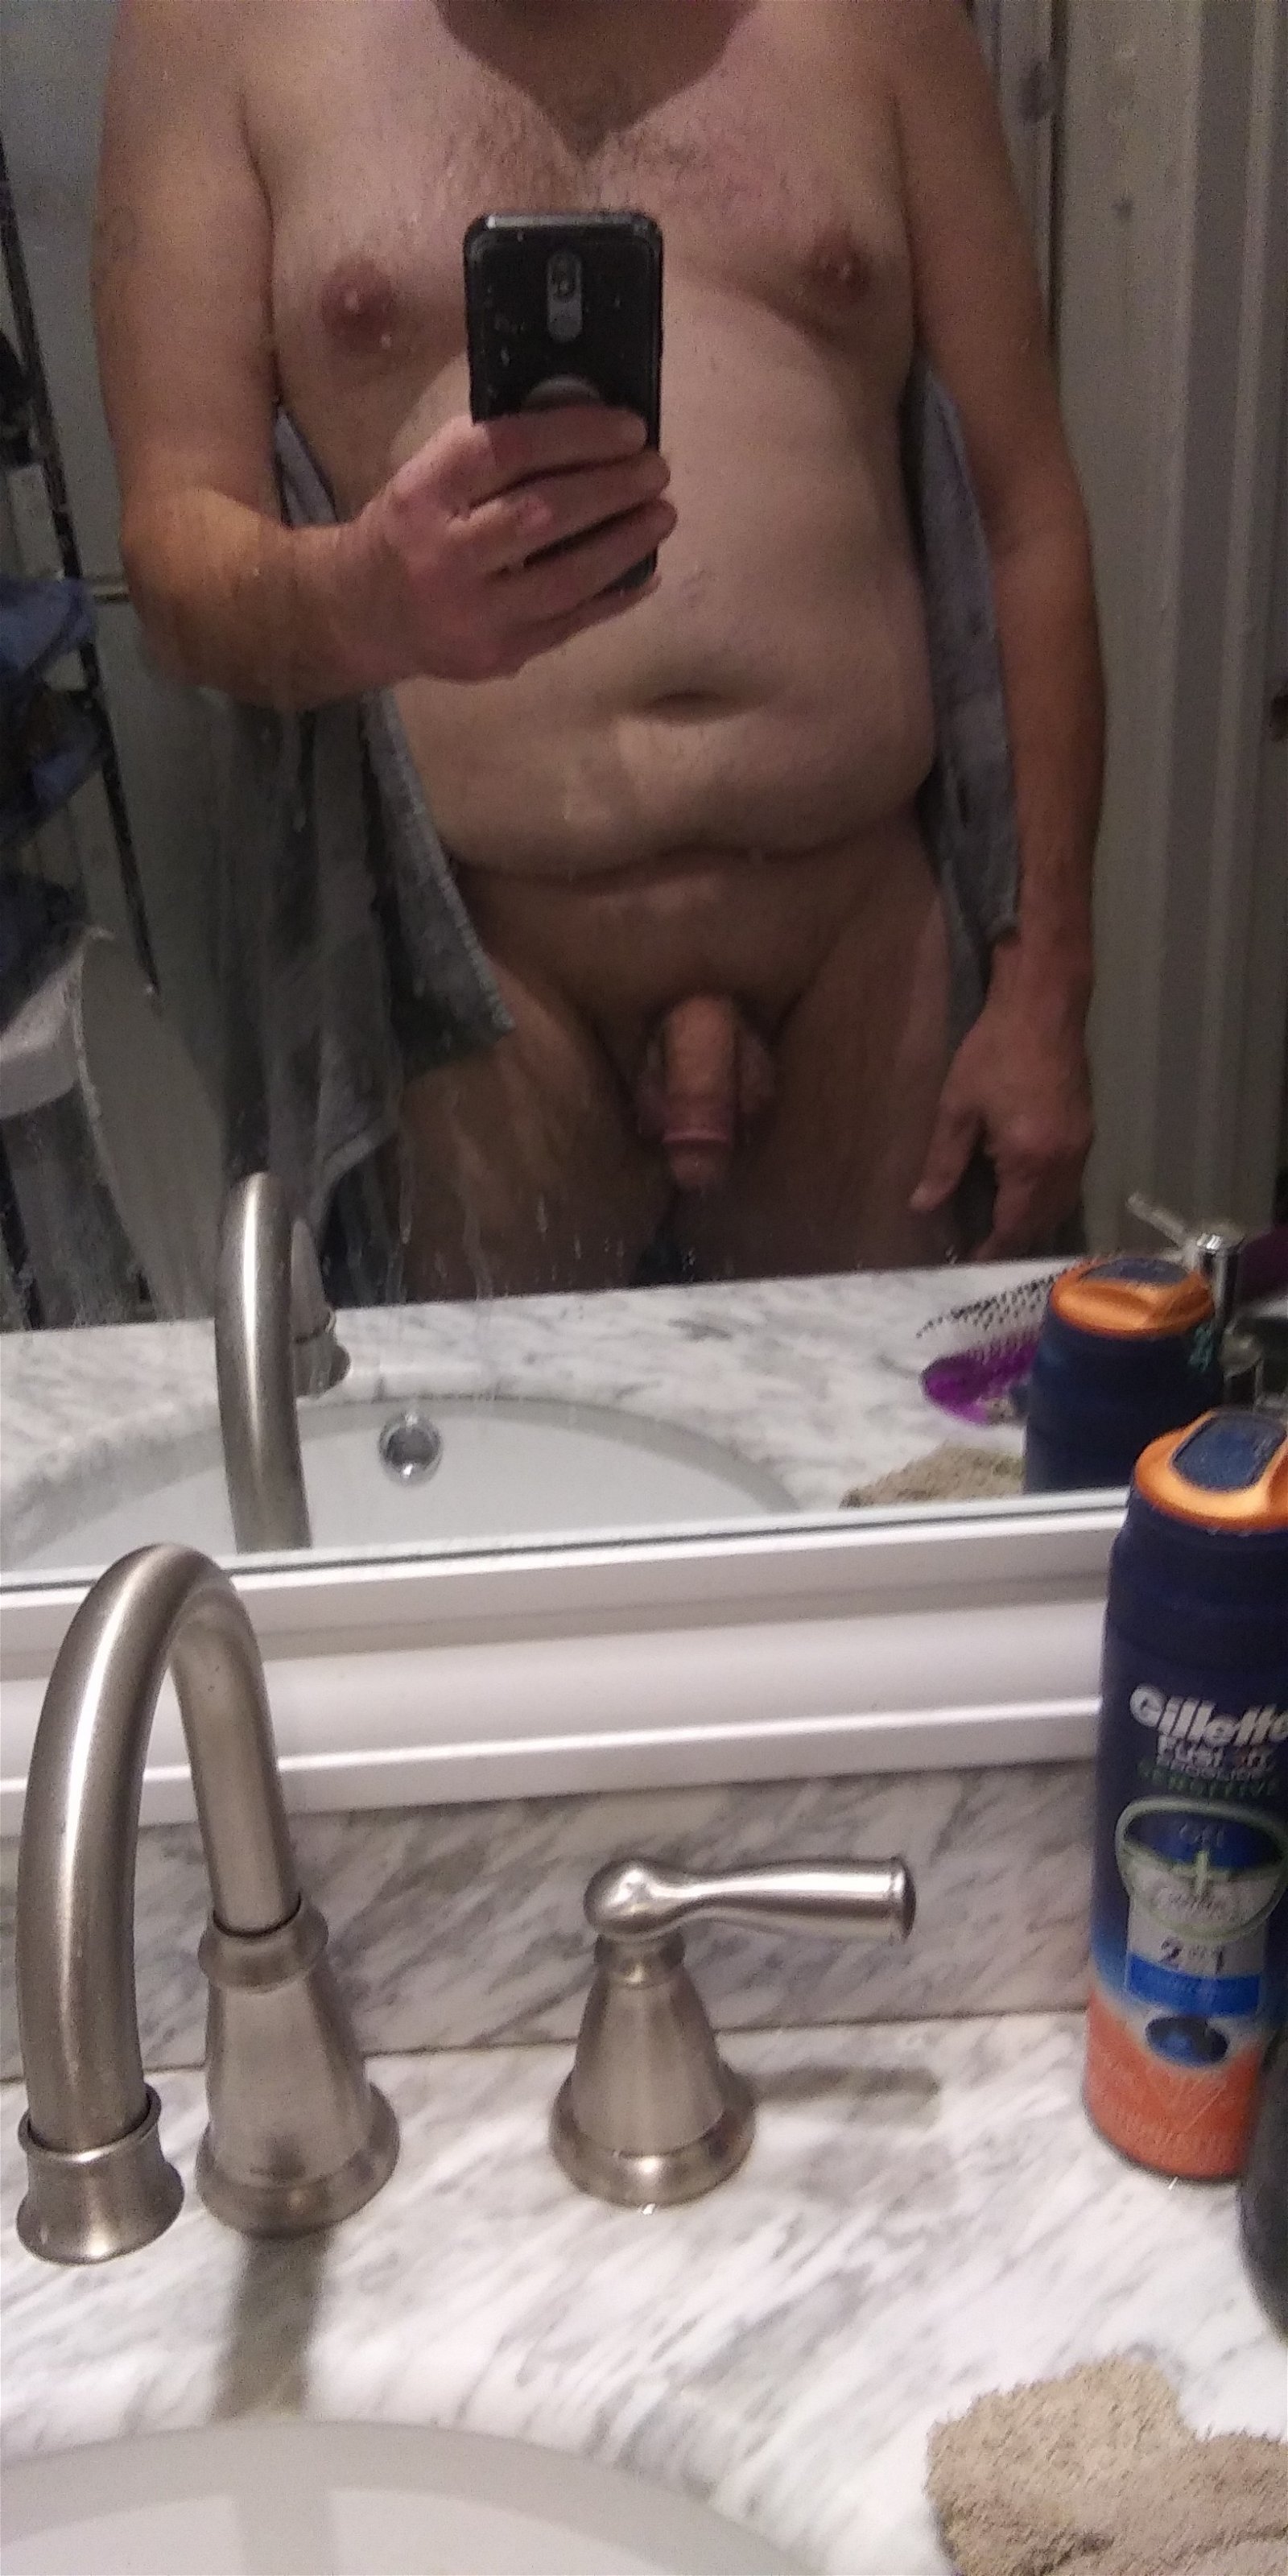 Photo by kratos26 with the username @kratos26,  January 9, 2021 at 7:01 AM. The post is about the topic Amateur Ohio women and the text says 'fresh out the shower who wants to play'